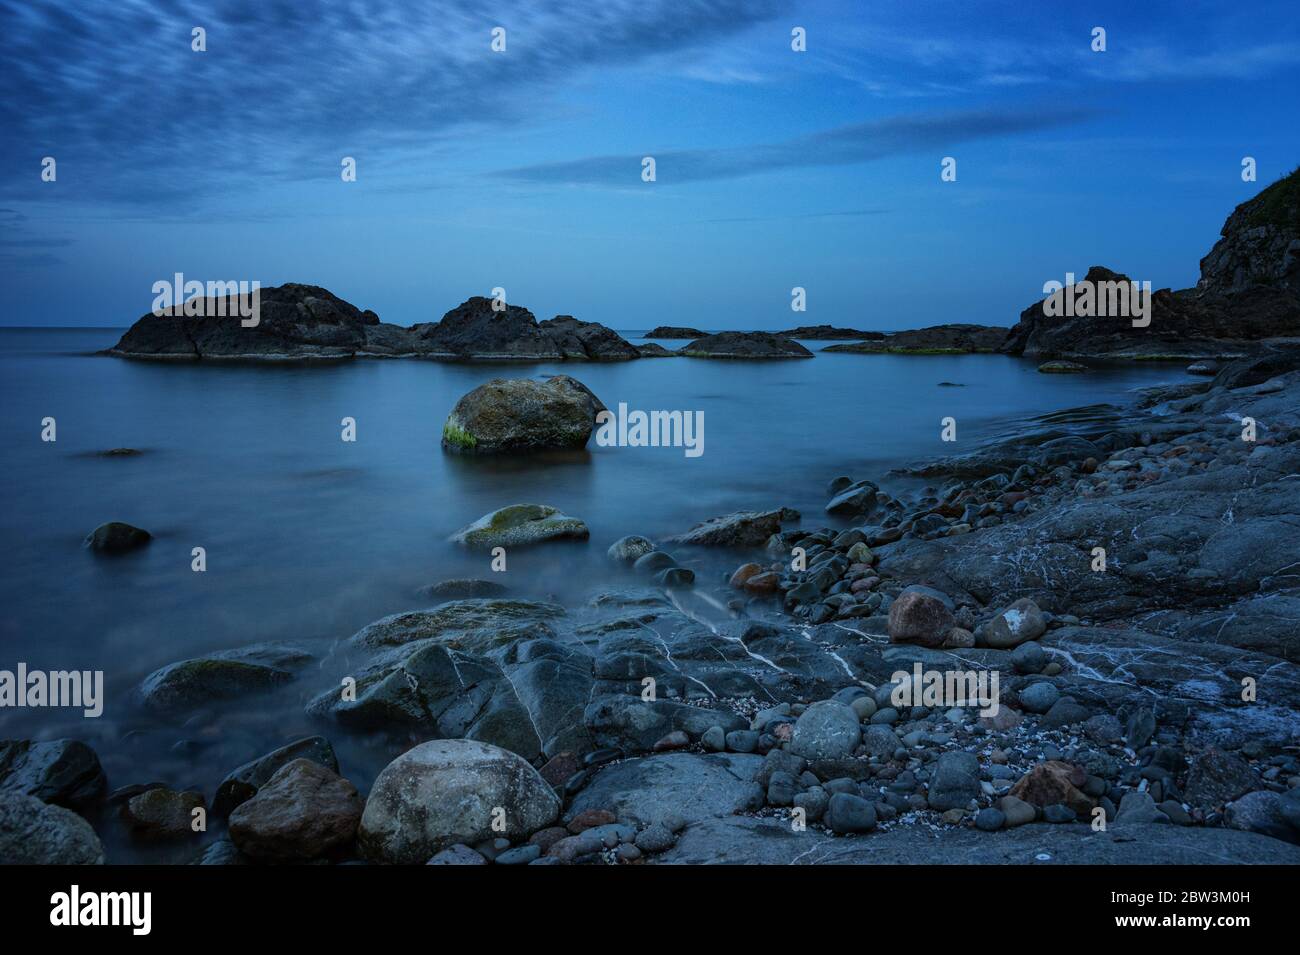 The Blue hour in Ahtoto Bay, near Sinemorets village, Bulgaria. Stock Photo